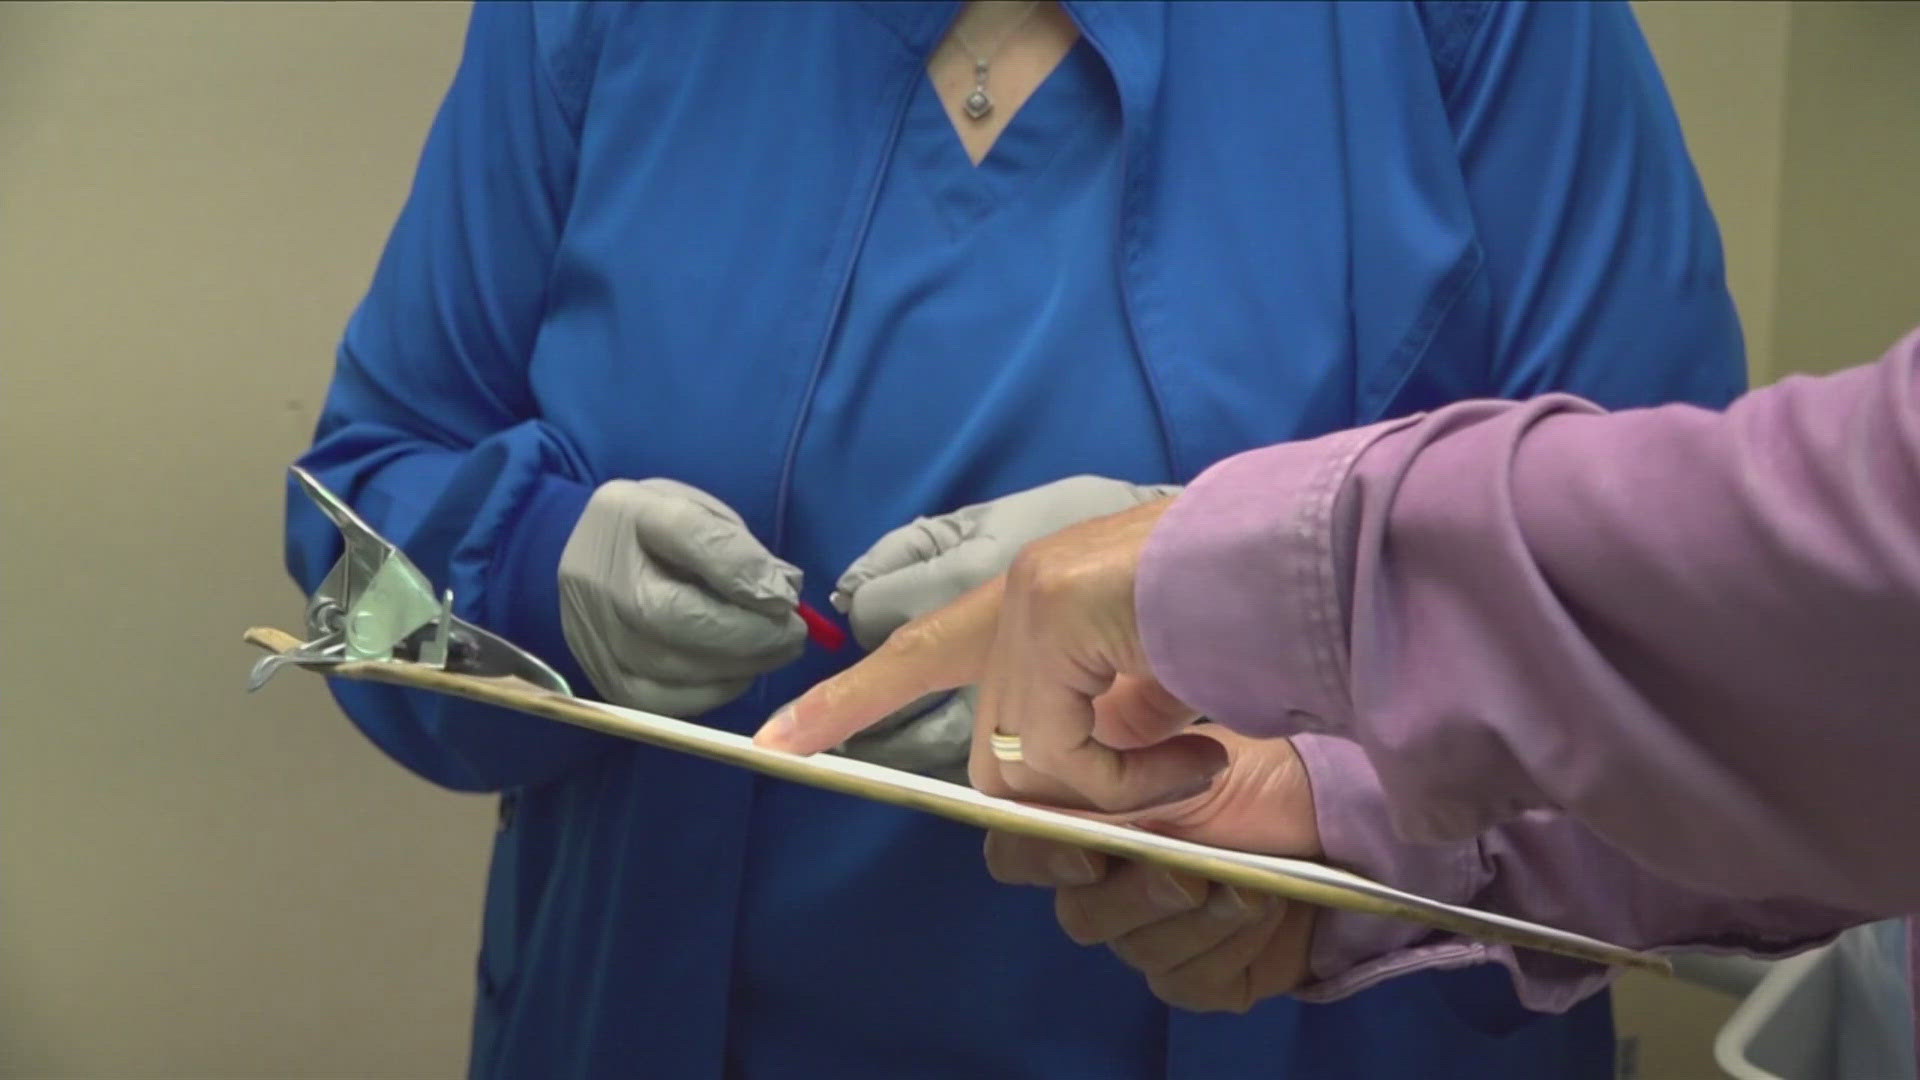 Baptist Memorial Hospital wants to encourage more cancer patients to participate in clinical trials so they can expand the different treatment options.